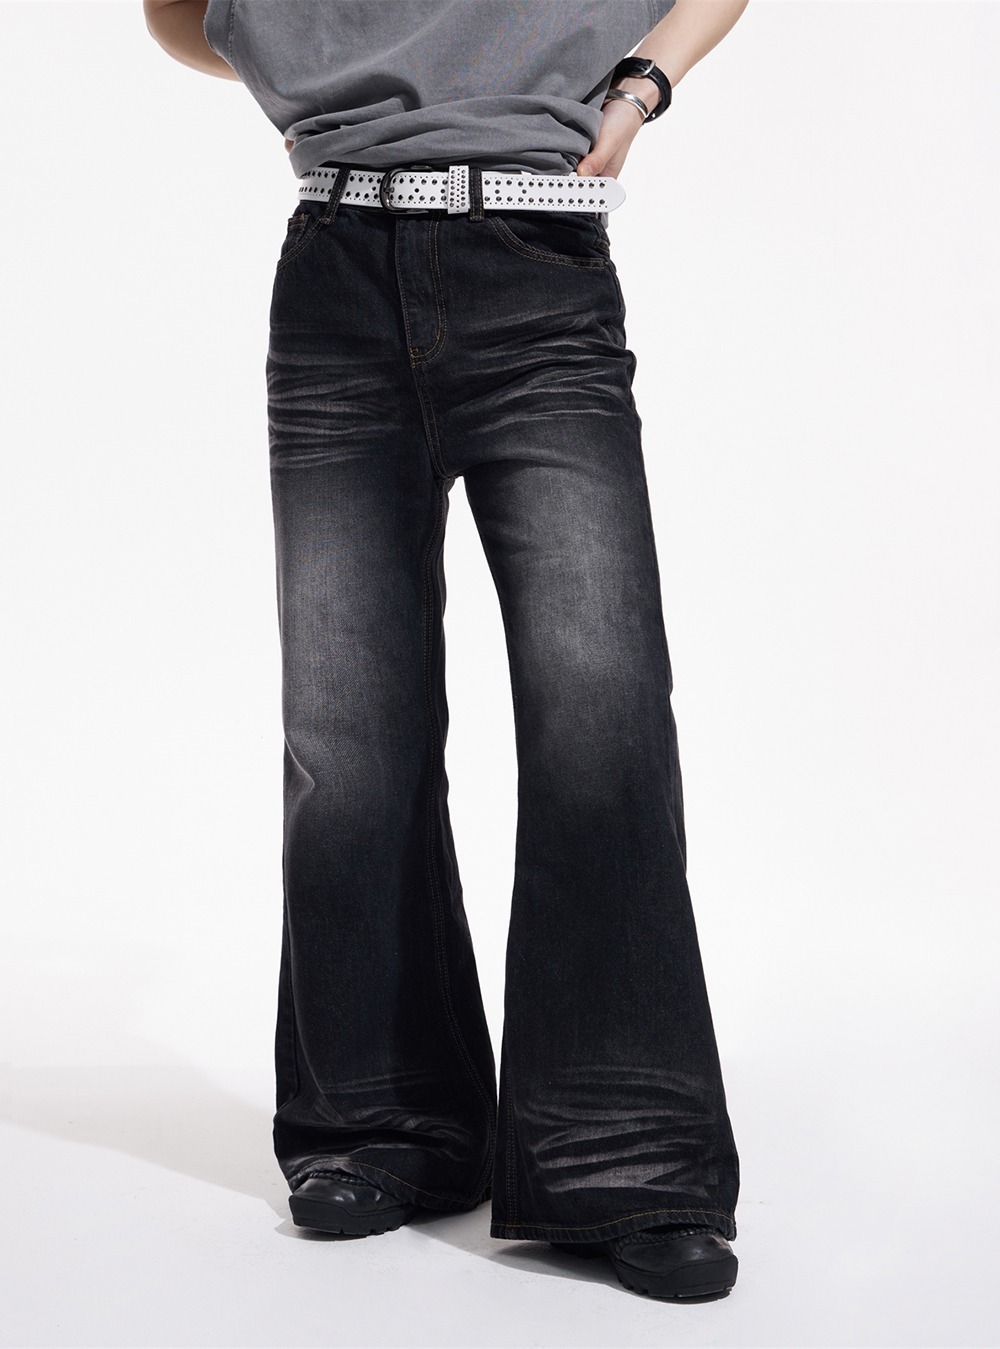 [PEOPLESTYLE] Slimming Bootcut Jeans